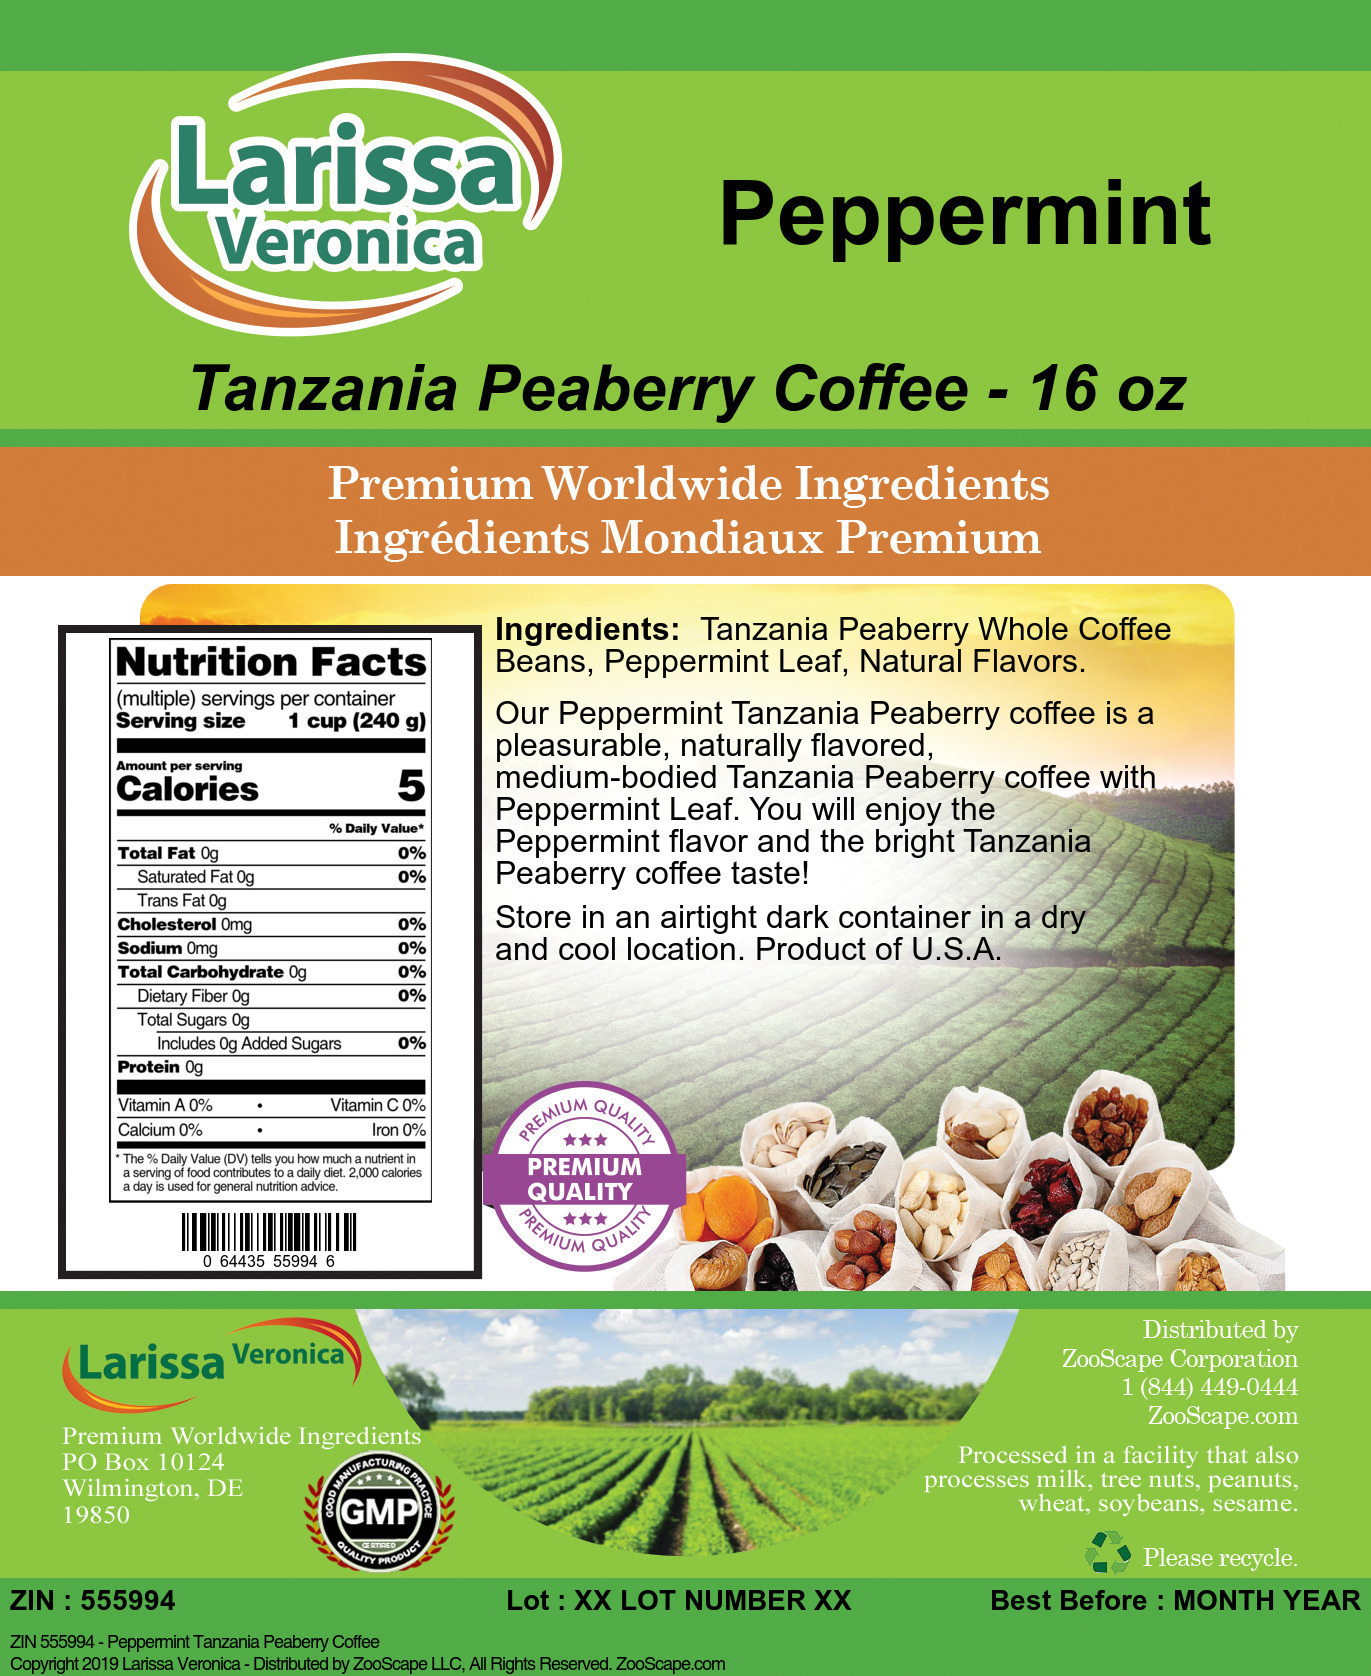 Peppermint Tanzania Peaberry Coffee - Label